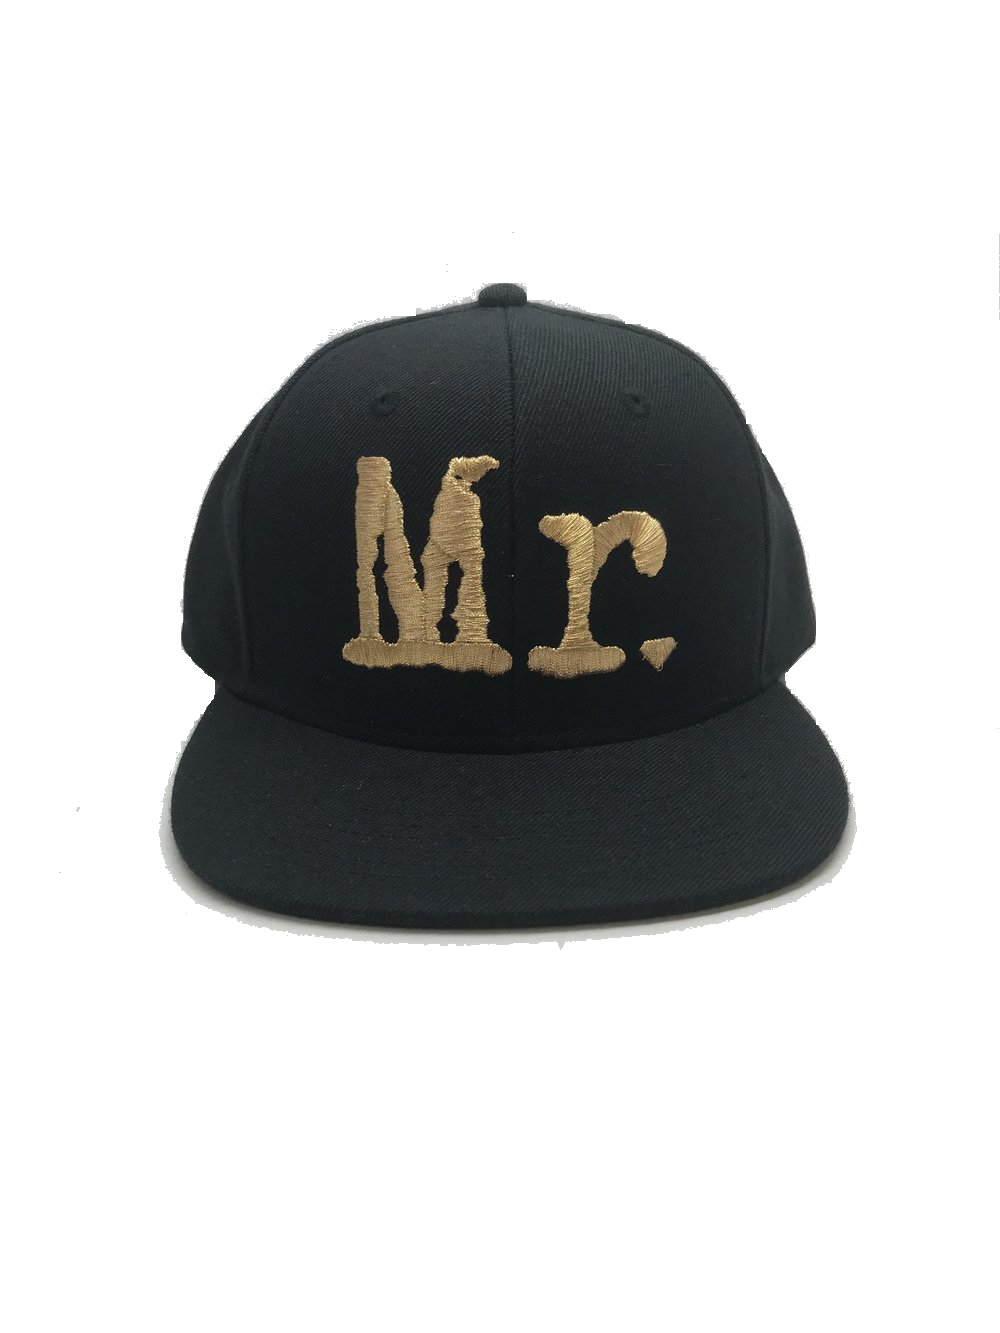 MR. CLASSIC SNAPBACK (More colors available)